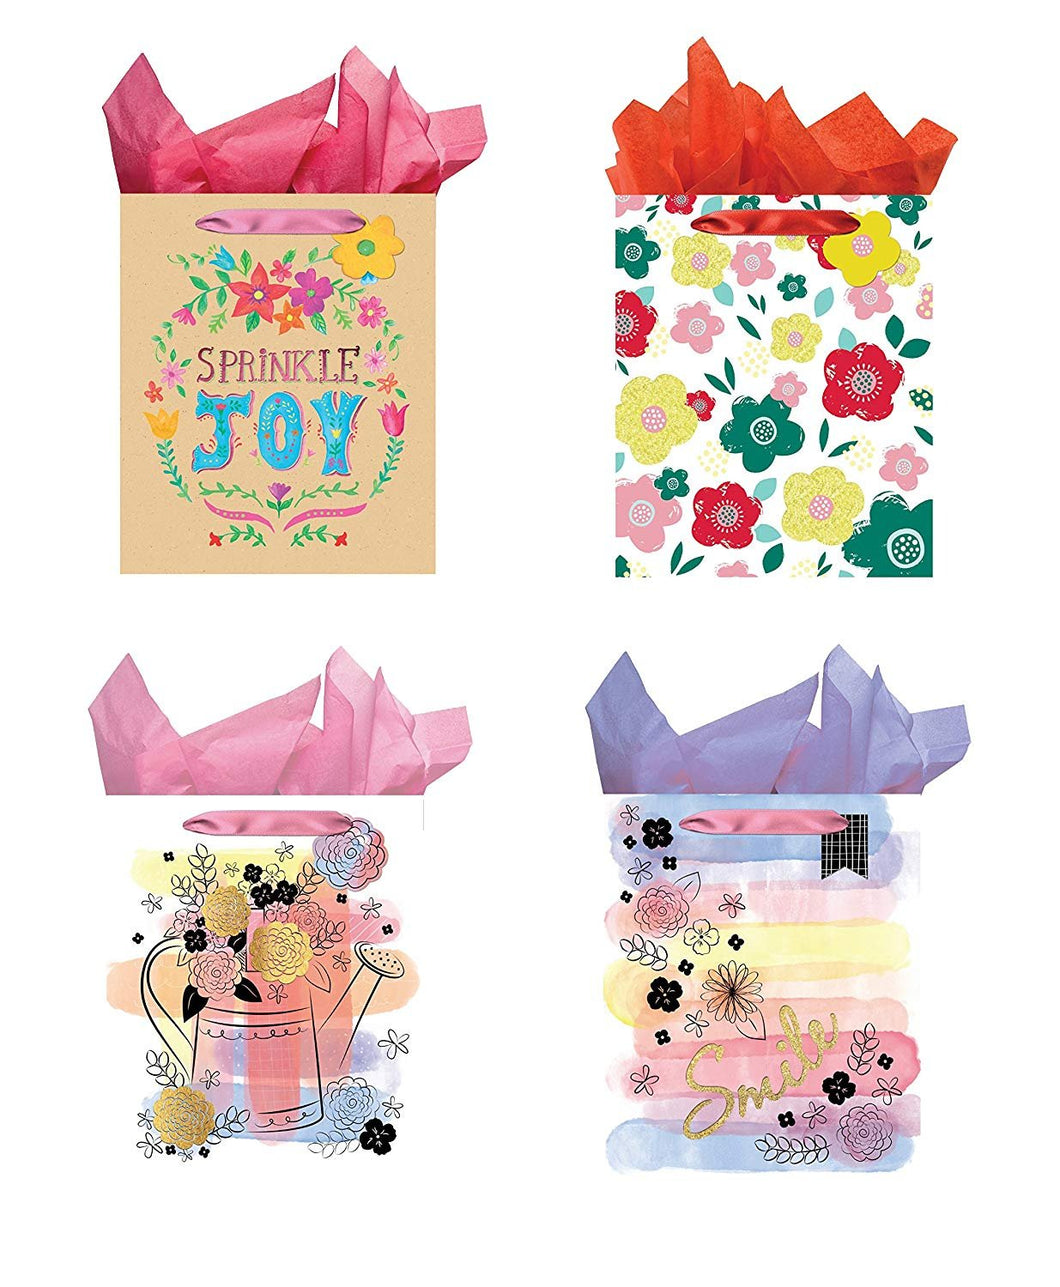 All Occasion Party Gift Bags - Set of 4 Large Gift Bags w/Tags & Tissue Paper